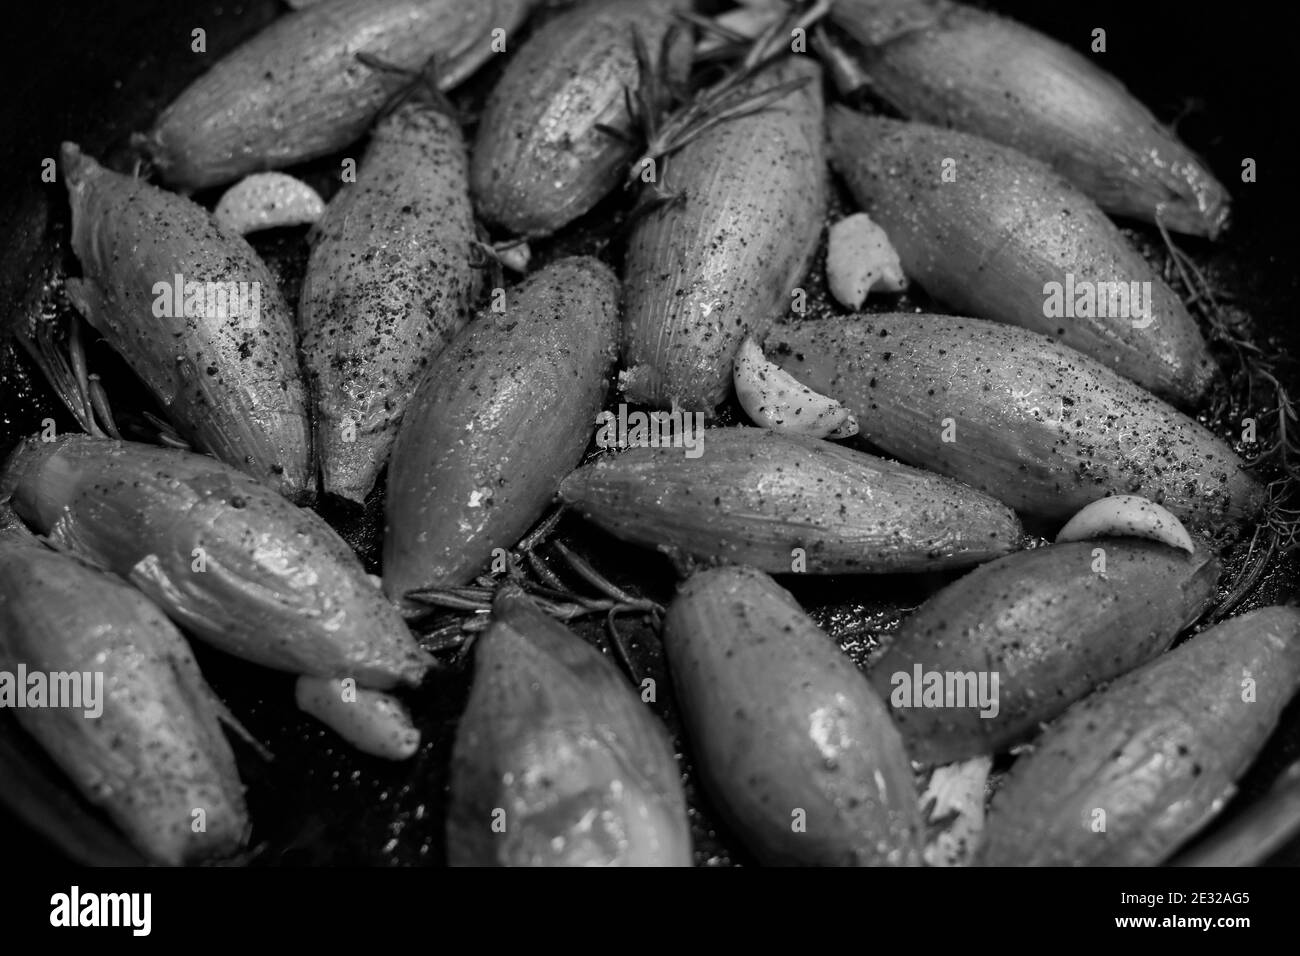 preparation of caramelized banana shallot as beef steak condiment, black and white close up shoot Stock Photo